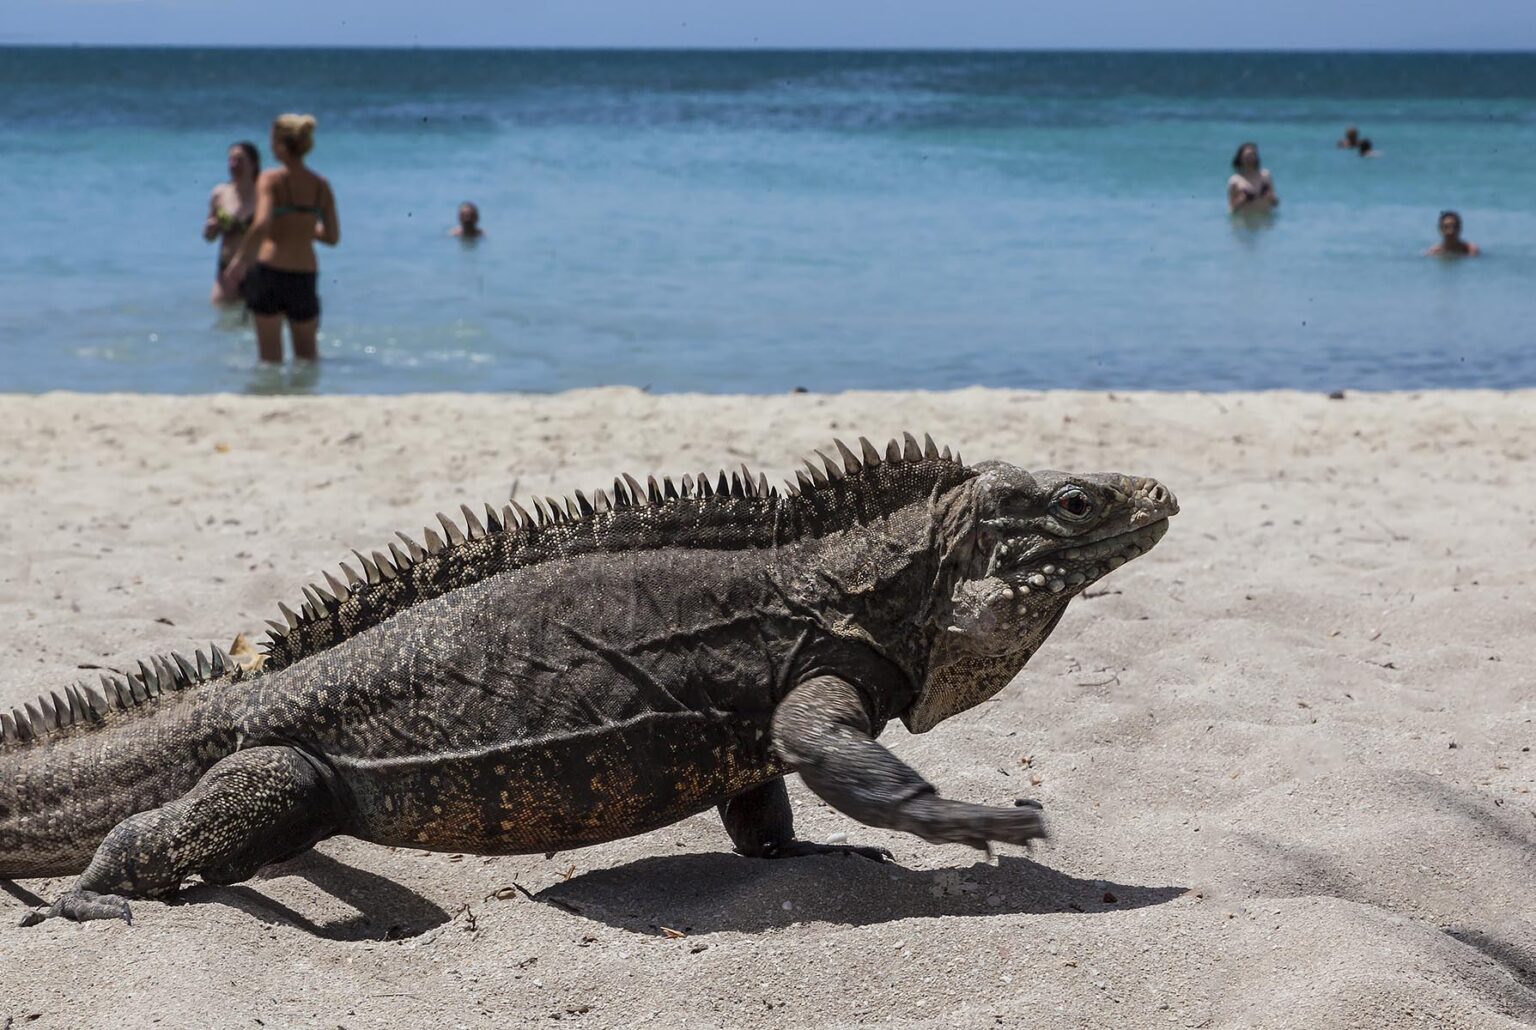 The tropical island of CAYO IGUANA reached by boat from PLAYA ANCON is a tourist destination - TRINIDAD, CUBA